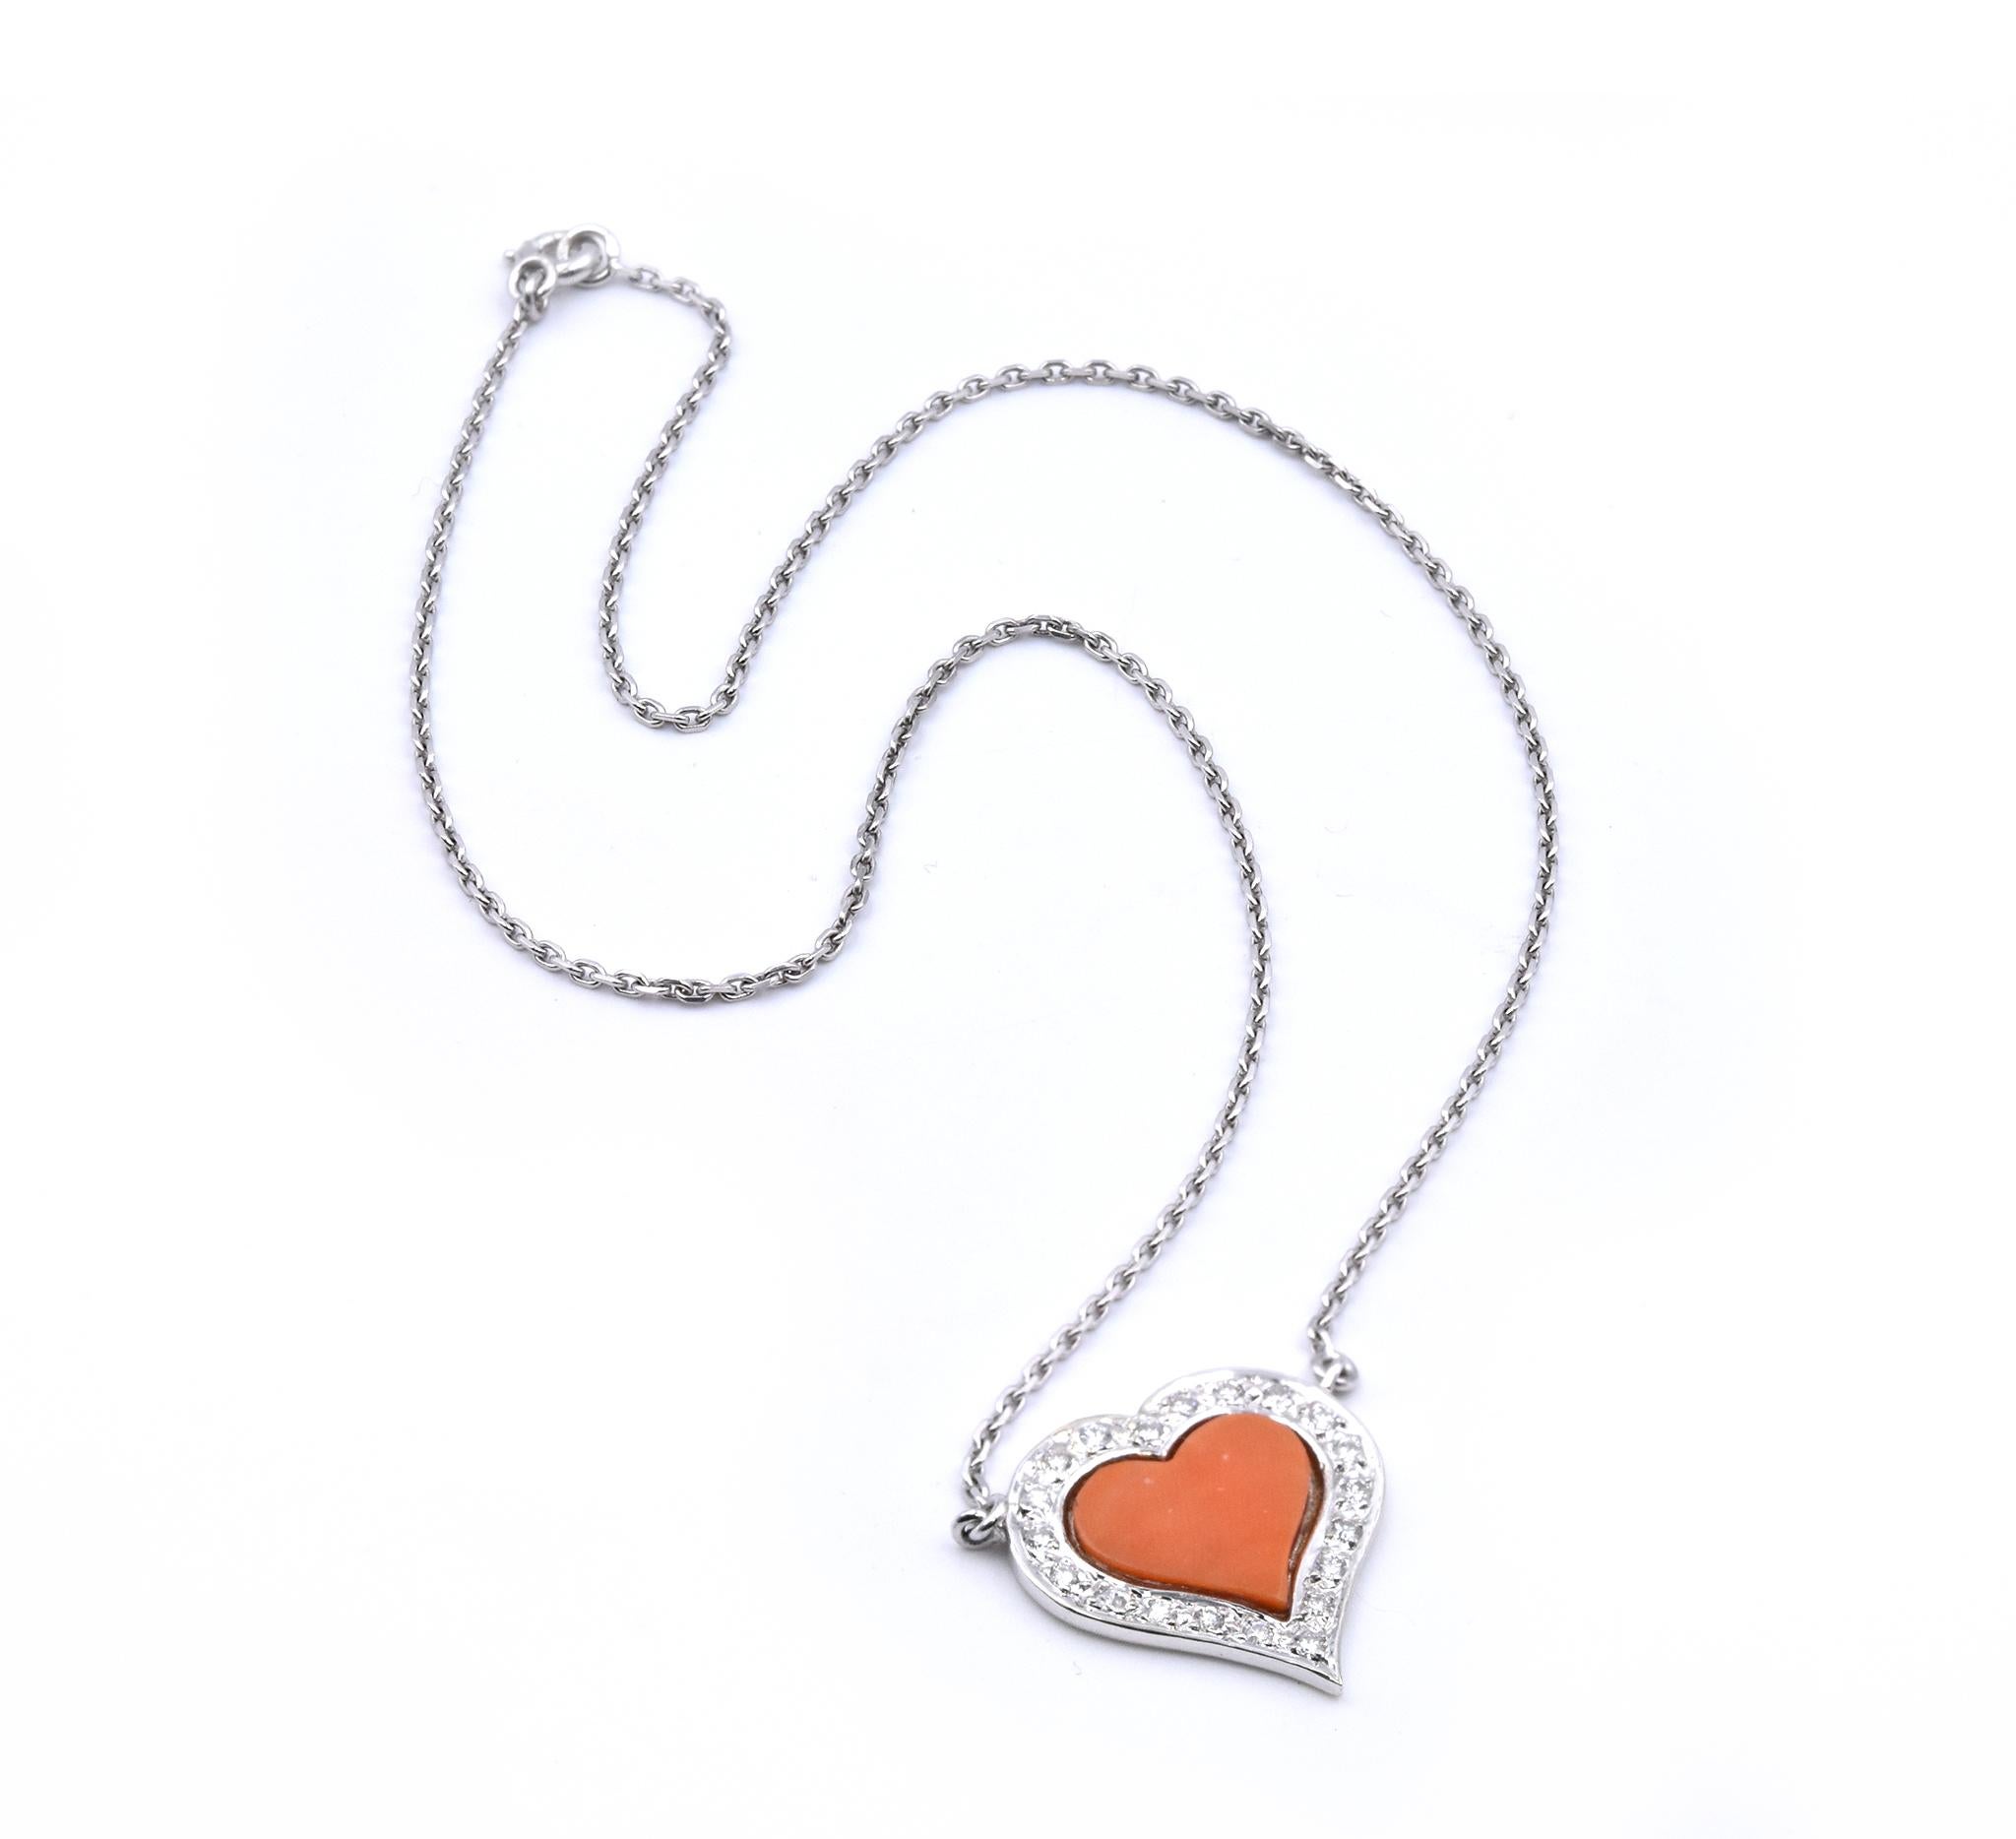 Designer: Fred
Material: 18k white gold
Diamonds: 20 round brilliant cut = .40cttw
Color: G 
Clarity: VS
Dimensions: necklace is 14.5-inches long, the heart measures 20mm x 18.6mm
Weight: 4.80 grams